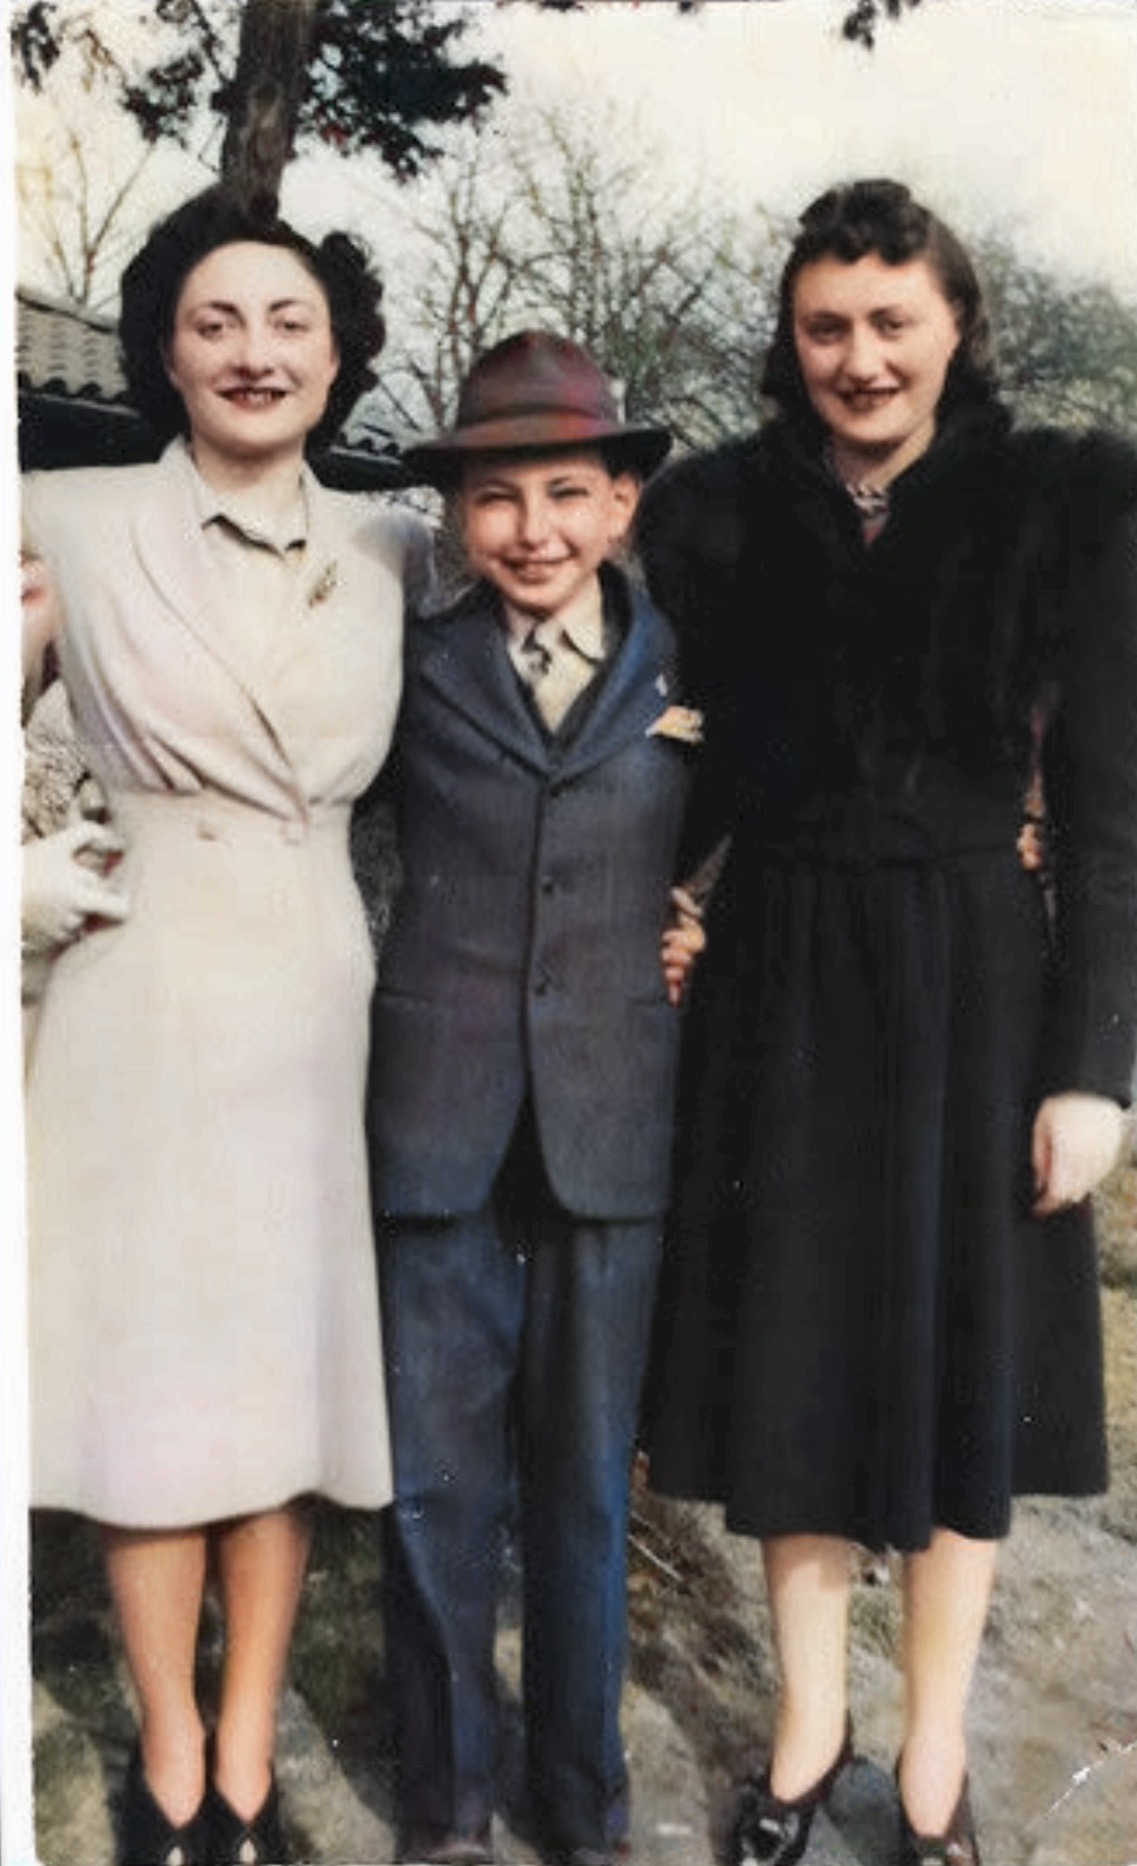 My father centered with his older sisters, Philadelphia around 1940